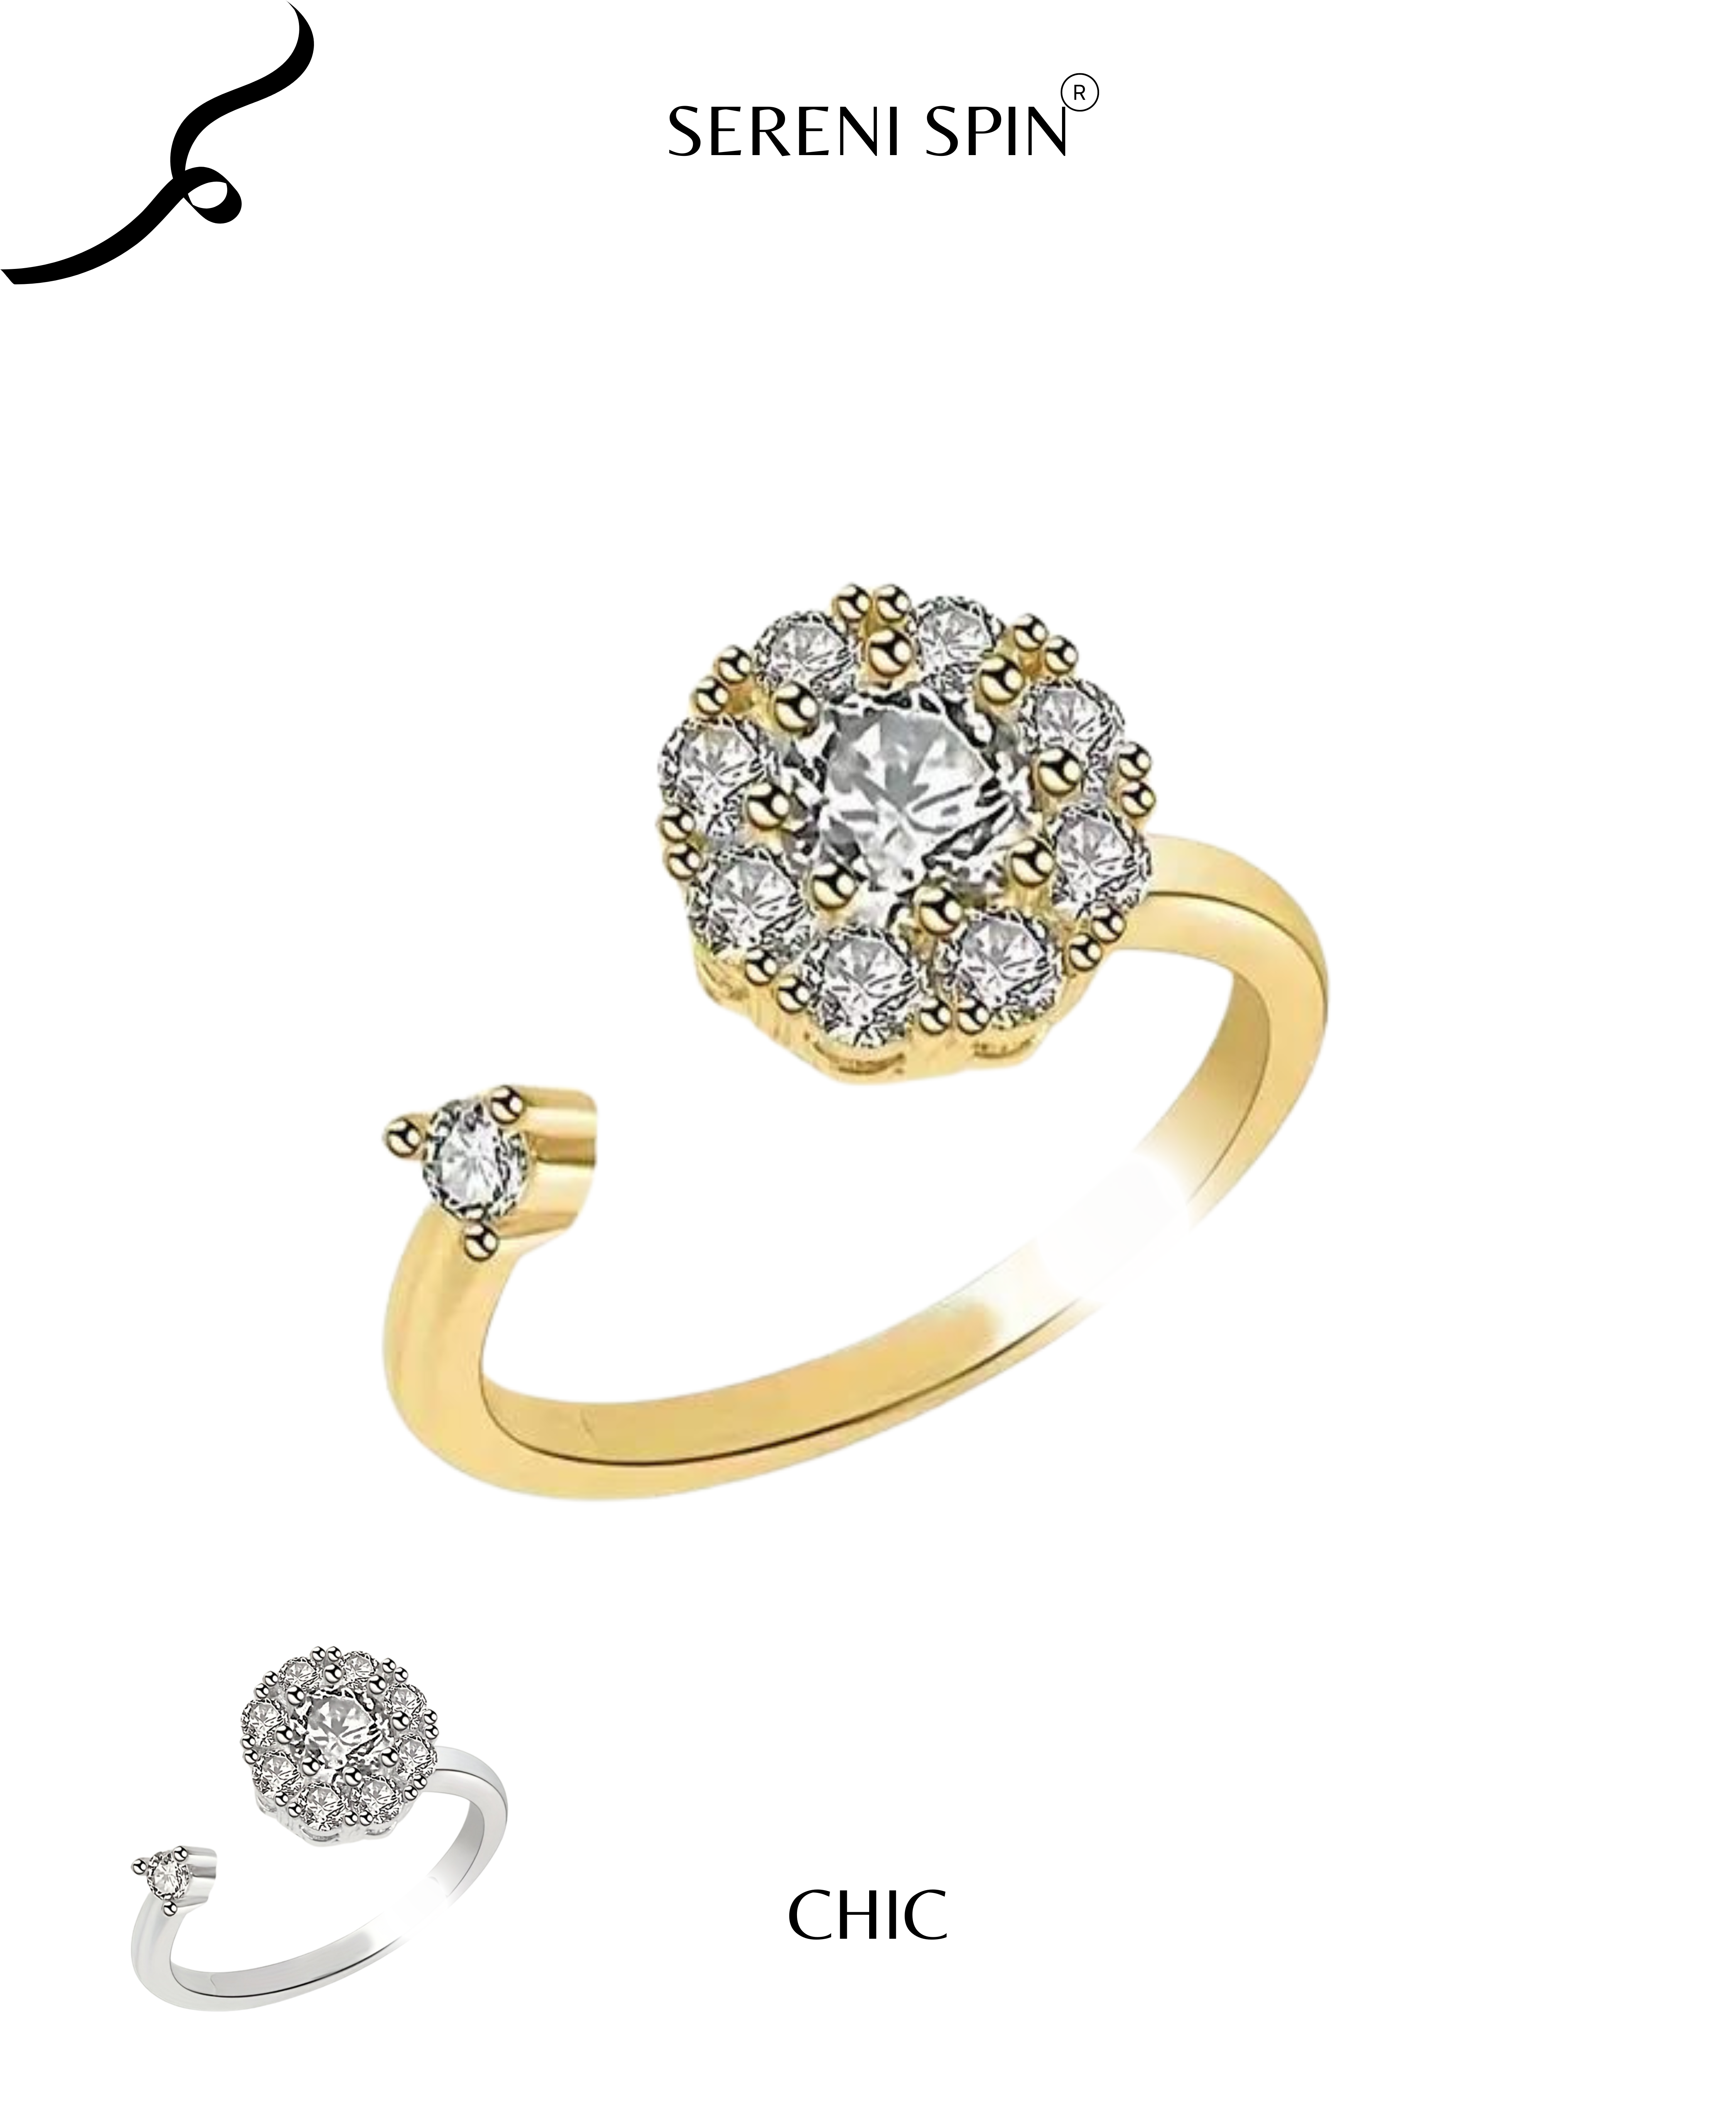 Amour Chic : The 'Chic' Love Ring ✨